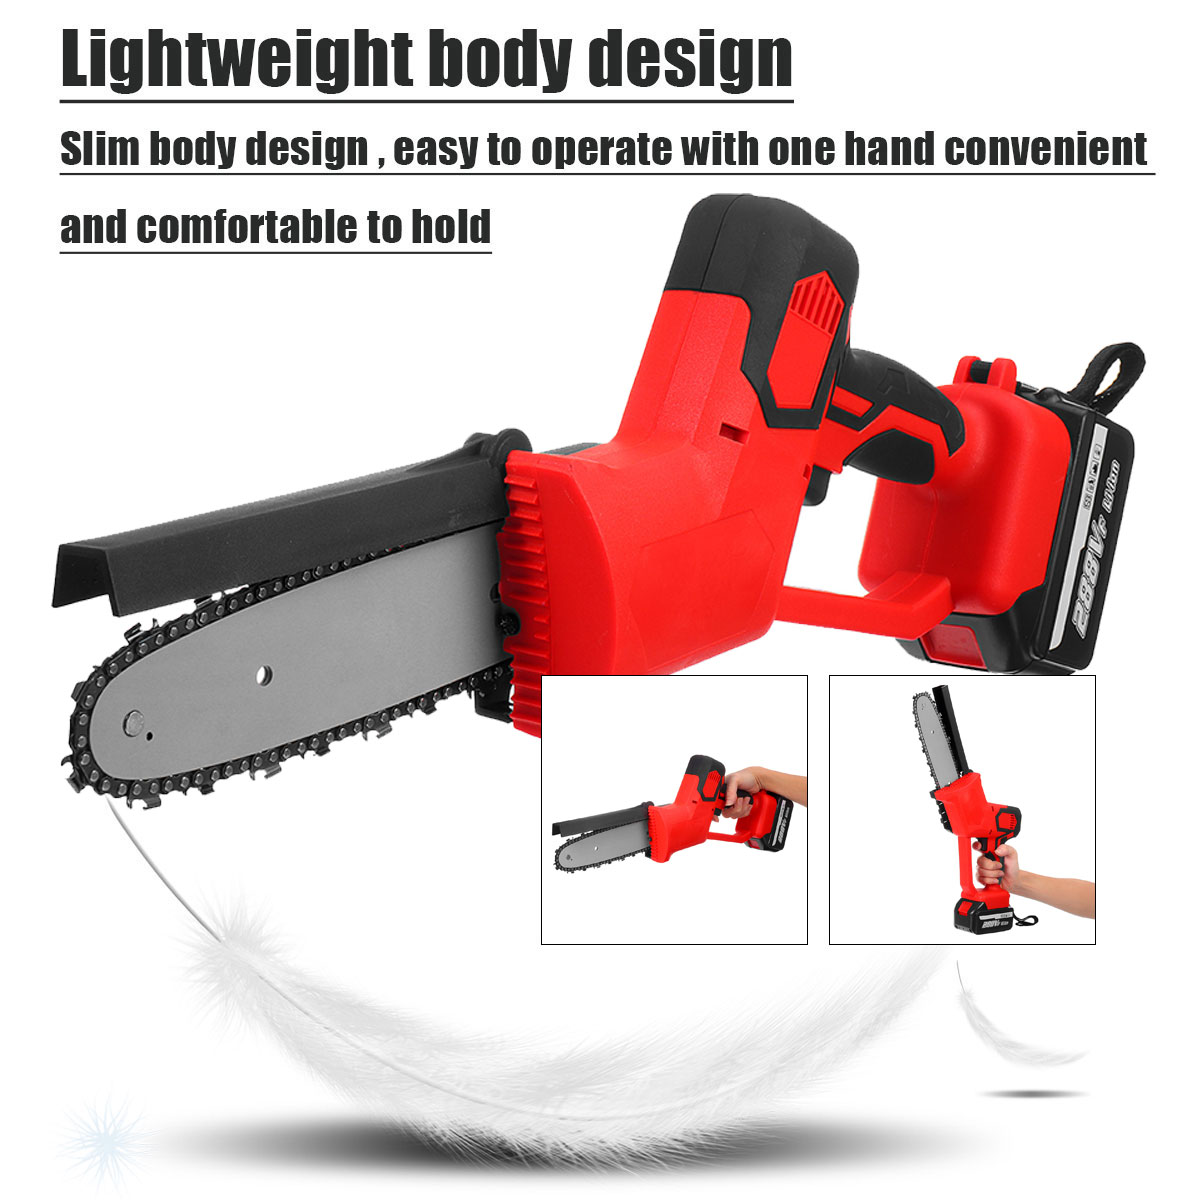 8-Inch-Cordless-Electric-Chain-Saw-288VF--Brushless-Motor-Power-Tools-Chainsaw-1854536-3